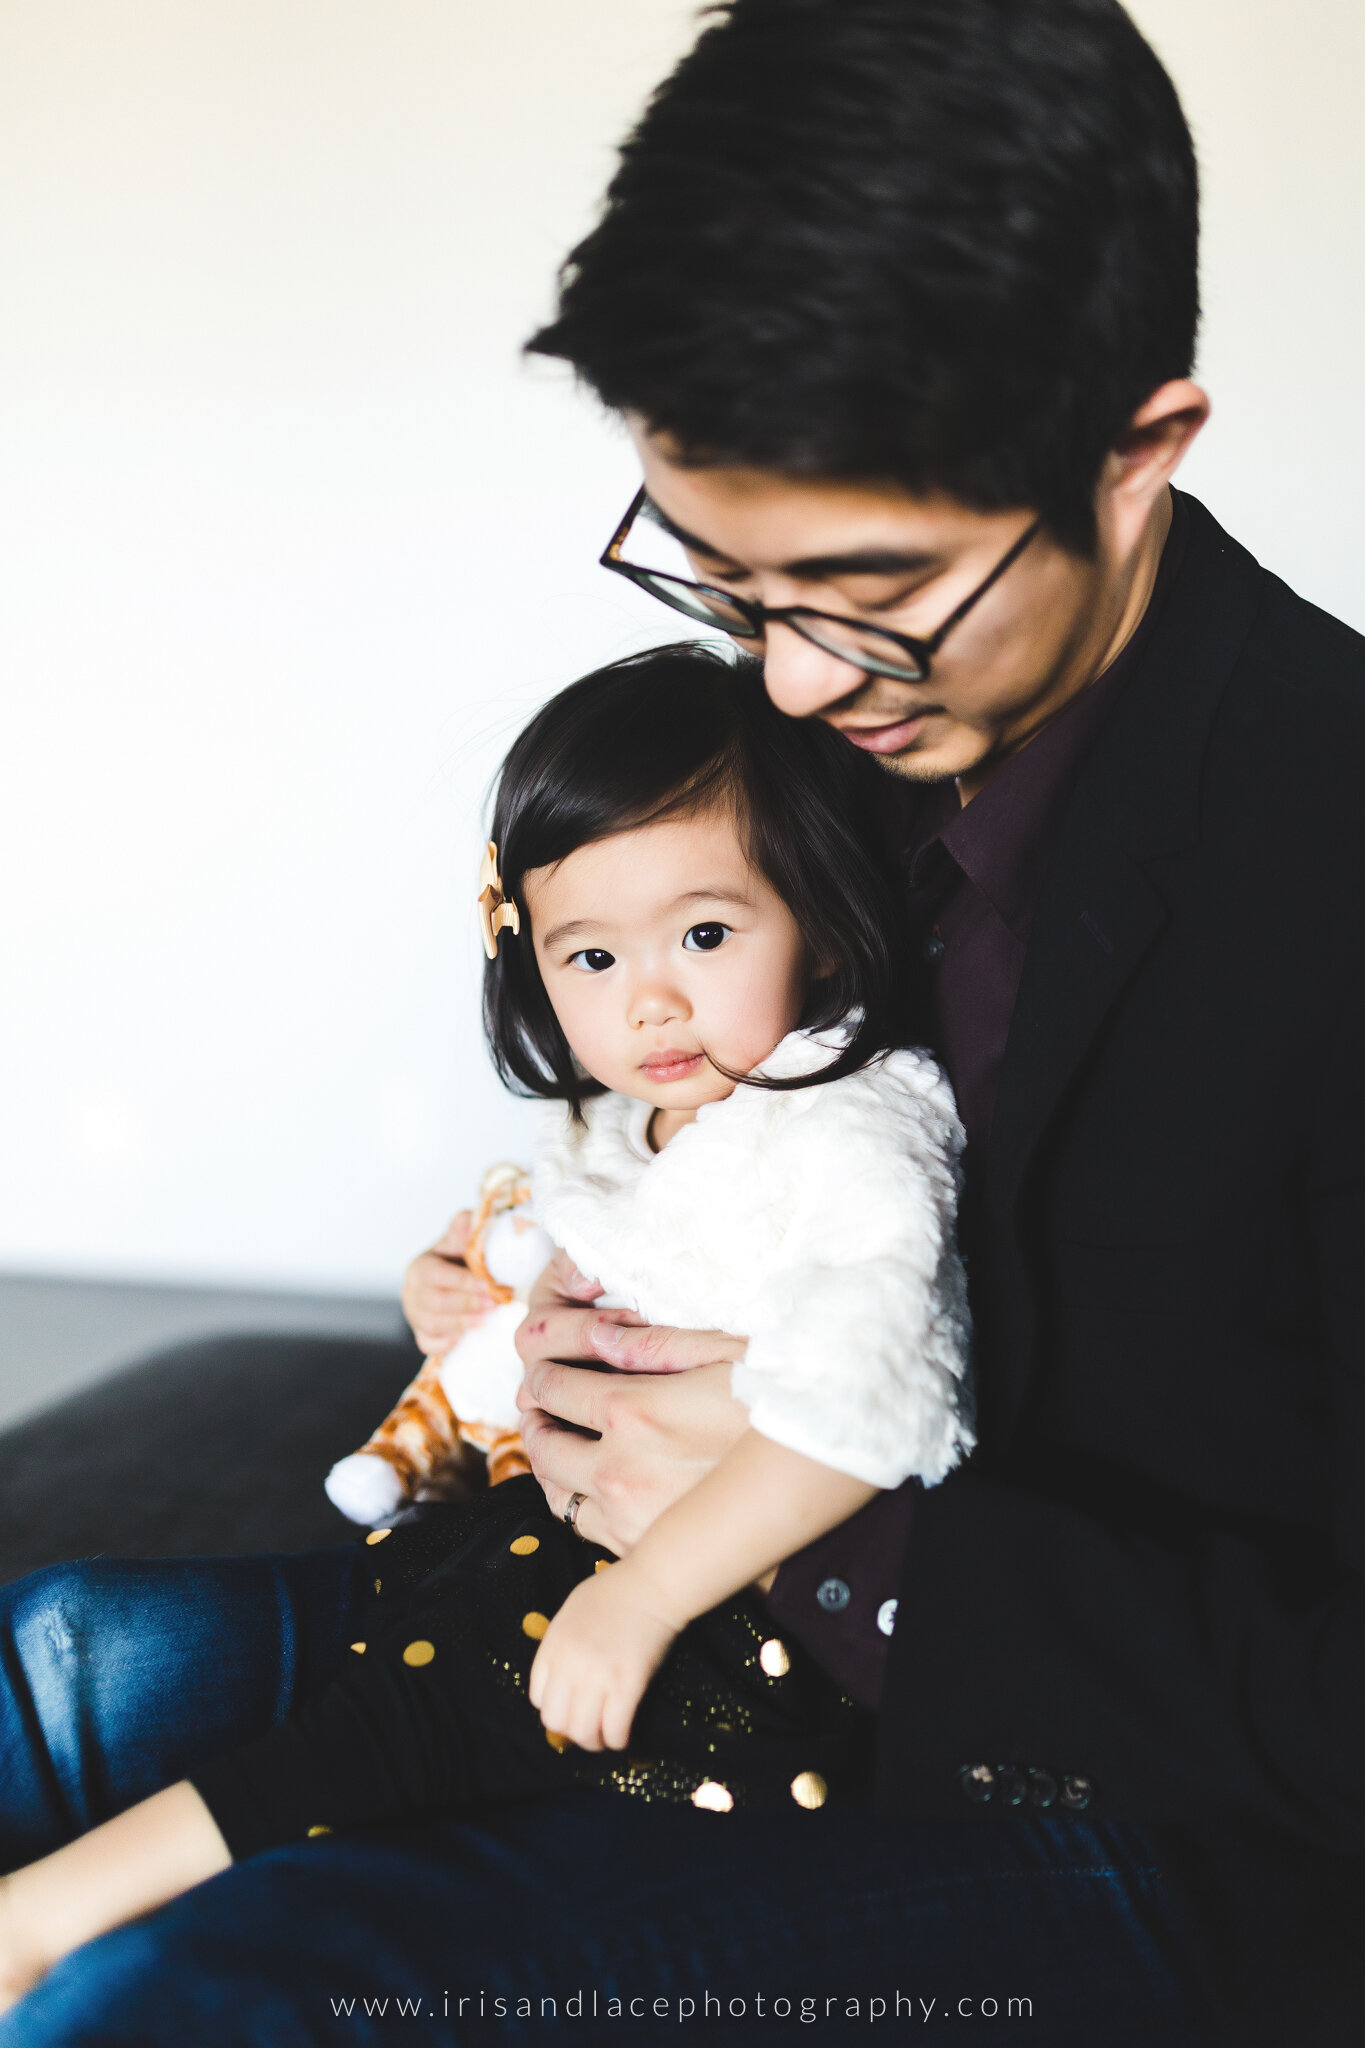 Father Daughter Indoor Lifestyle Photos  |  Iris and Lace Photography 